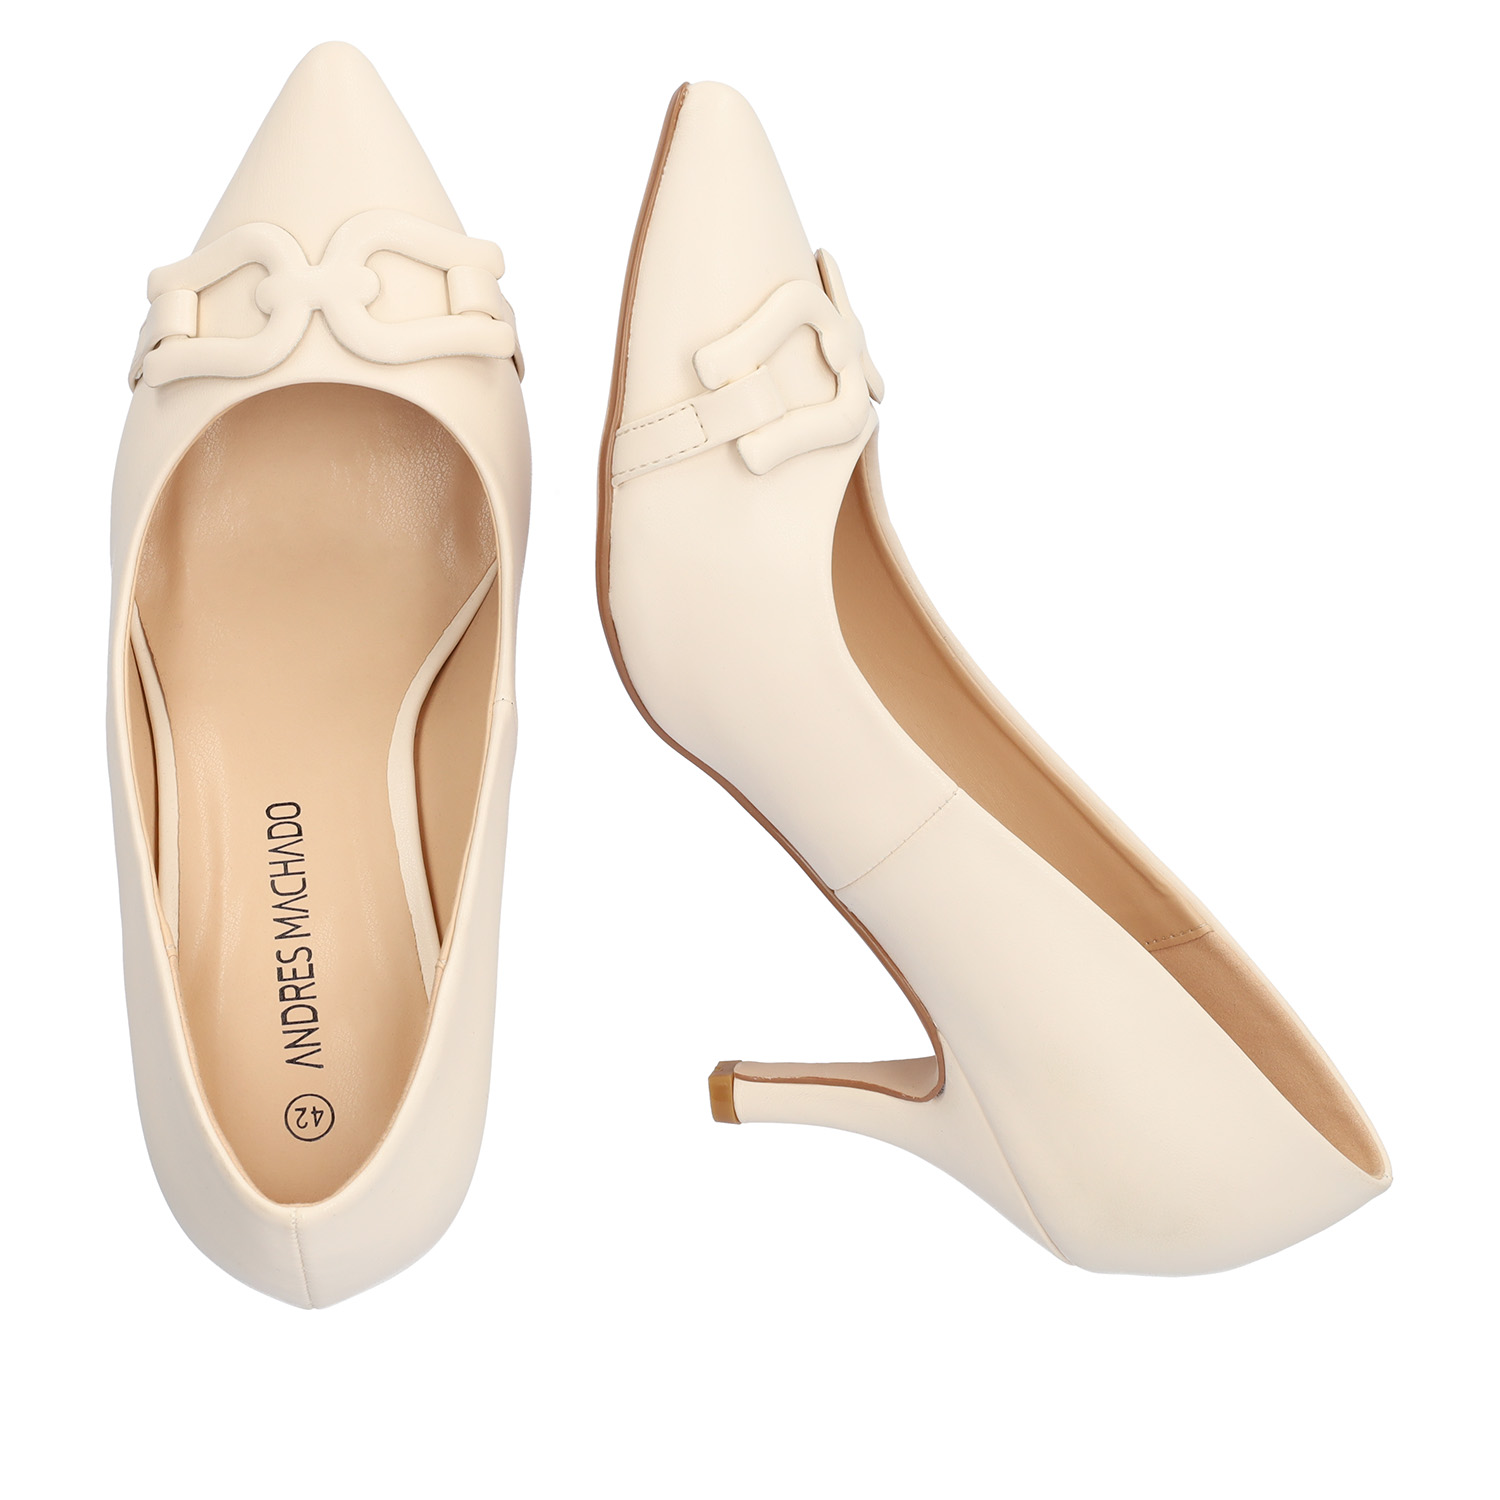 Heeled shoes in off white faux leather 